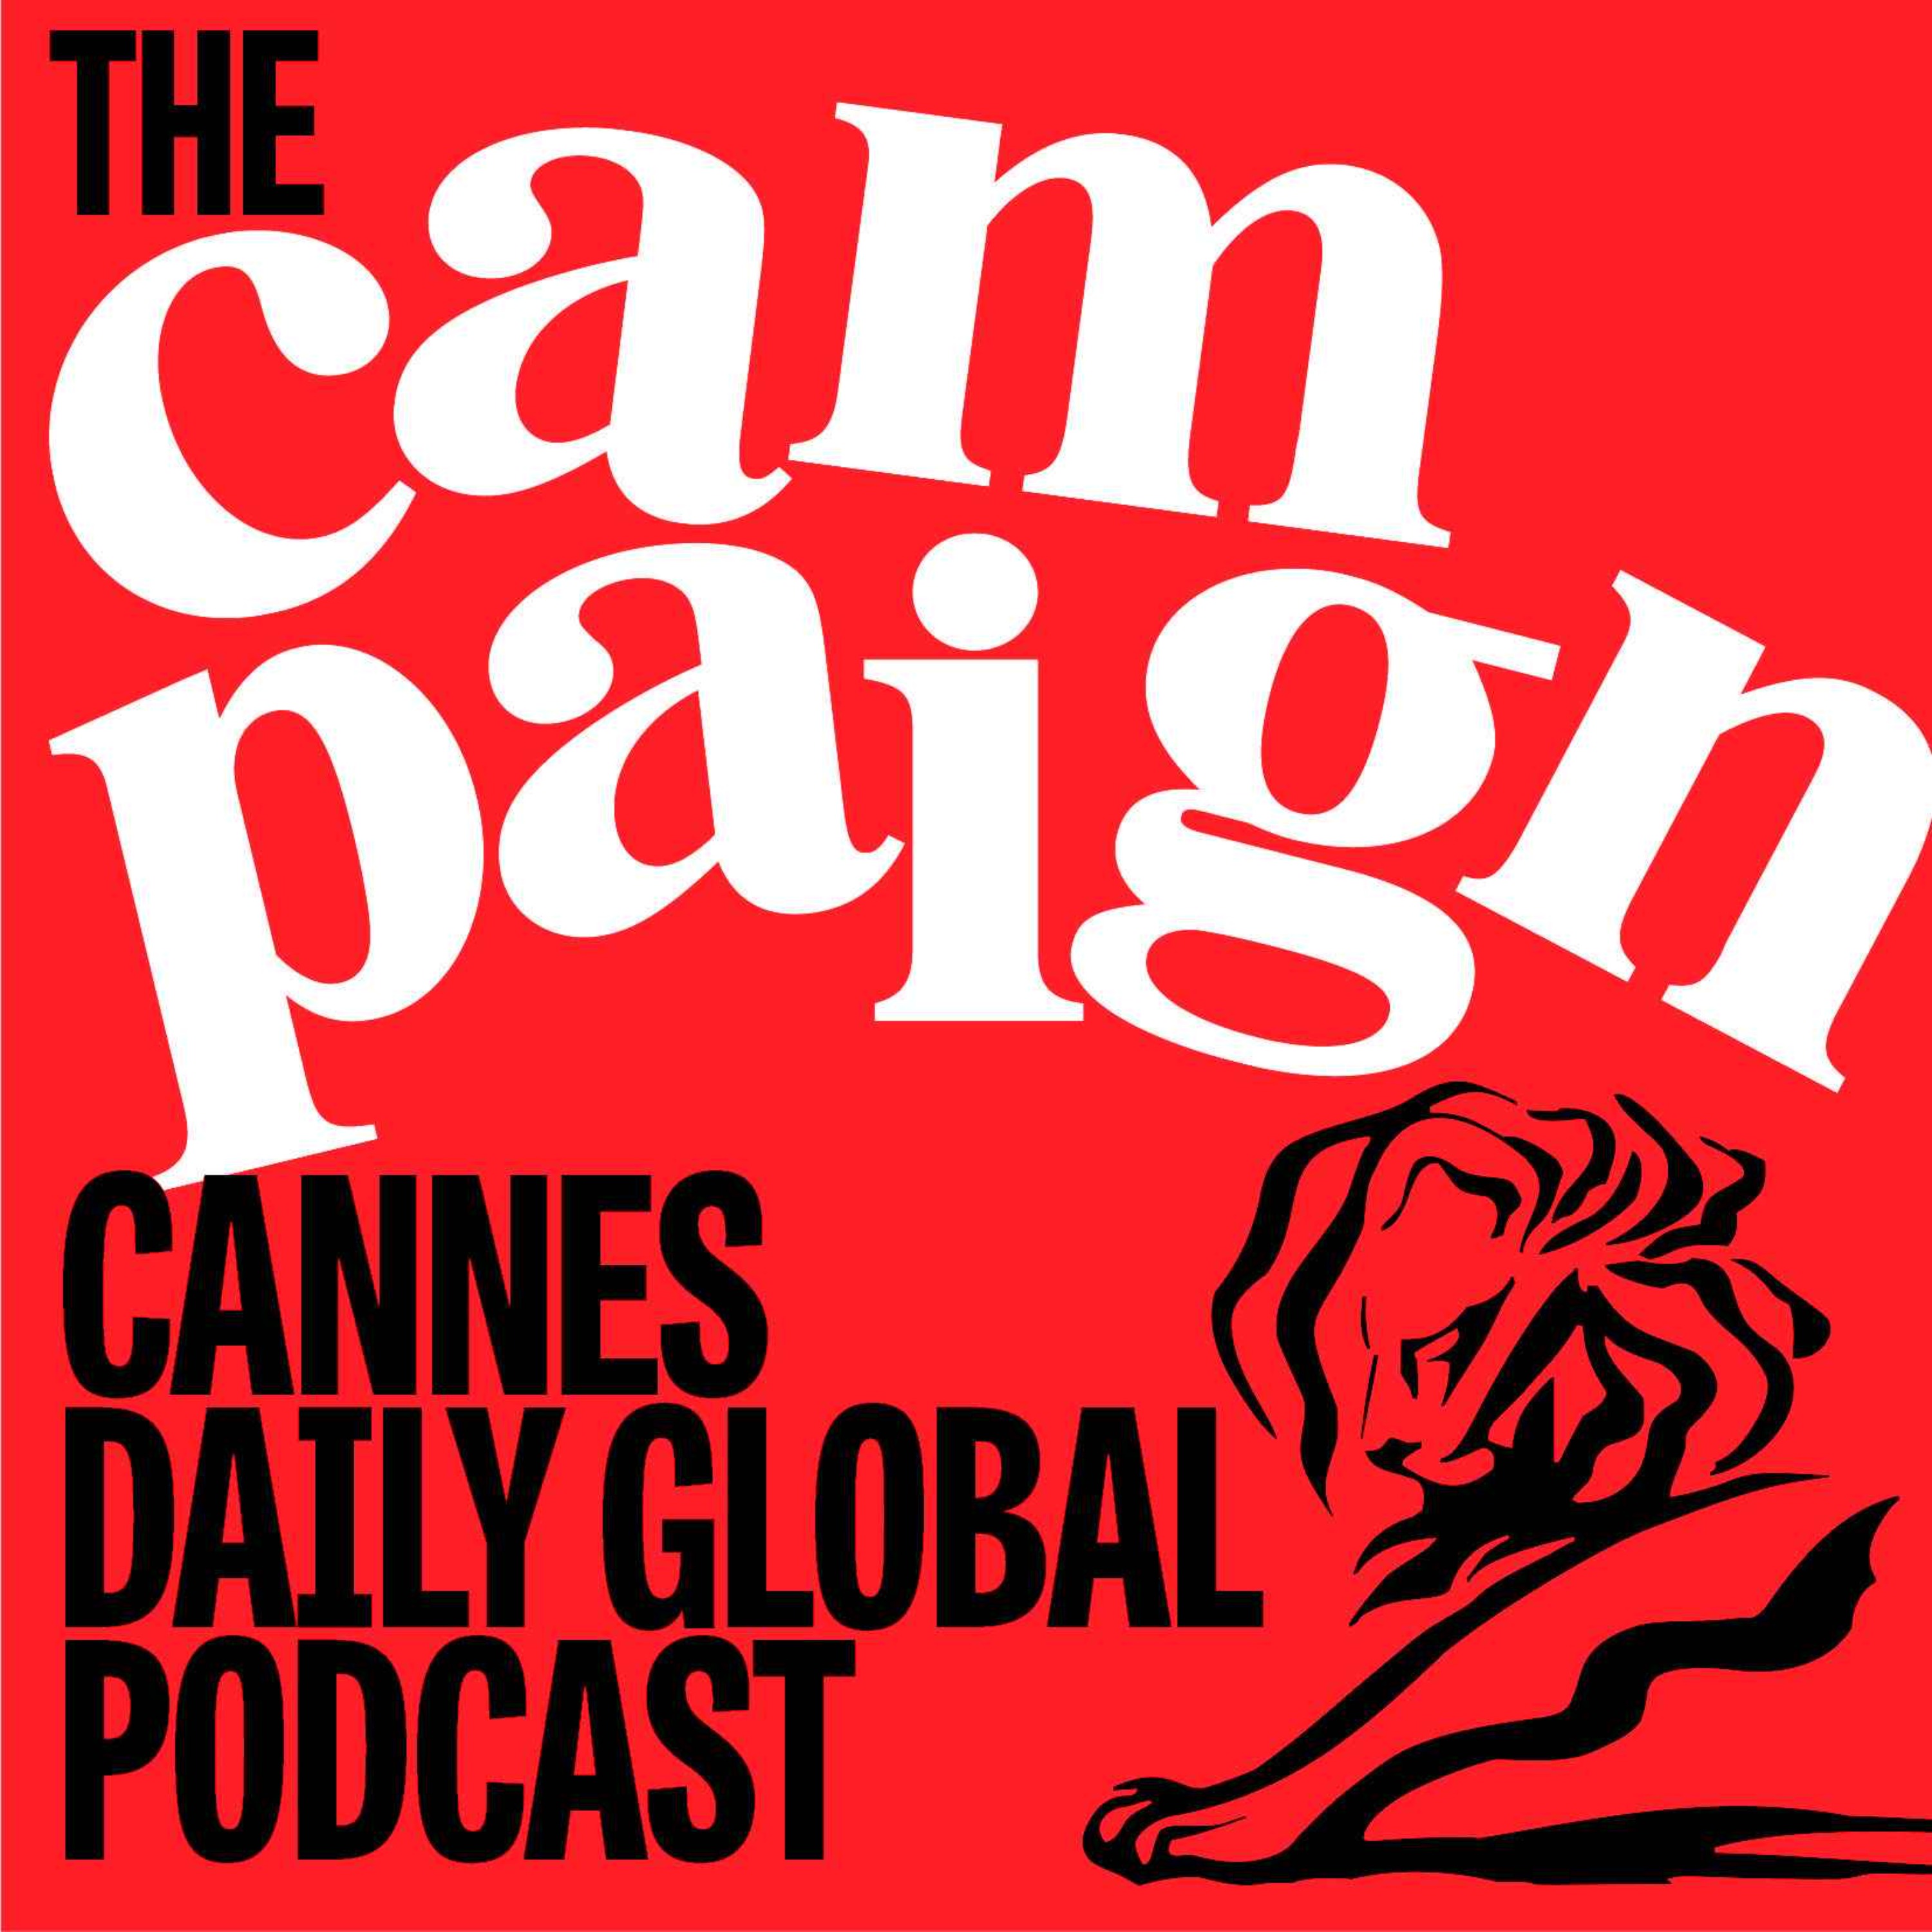 Cannes Daily Global Podcast ep. 5: Apple's Ted Lasso win and Campaign beach party